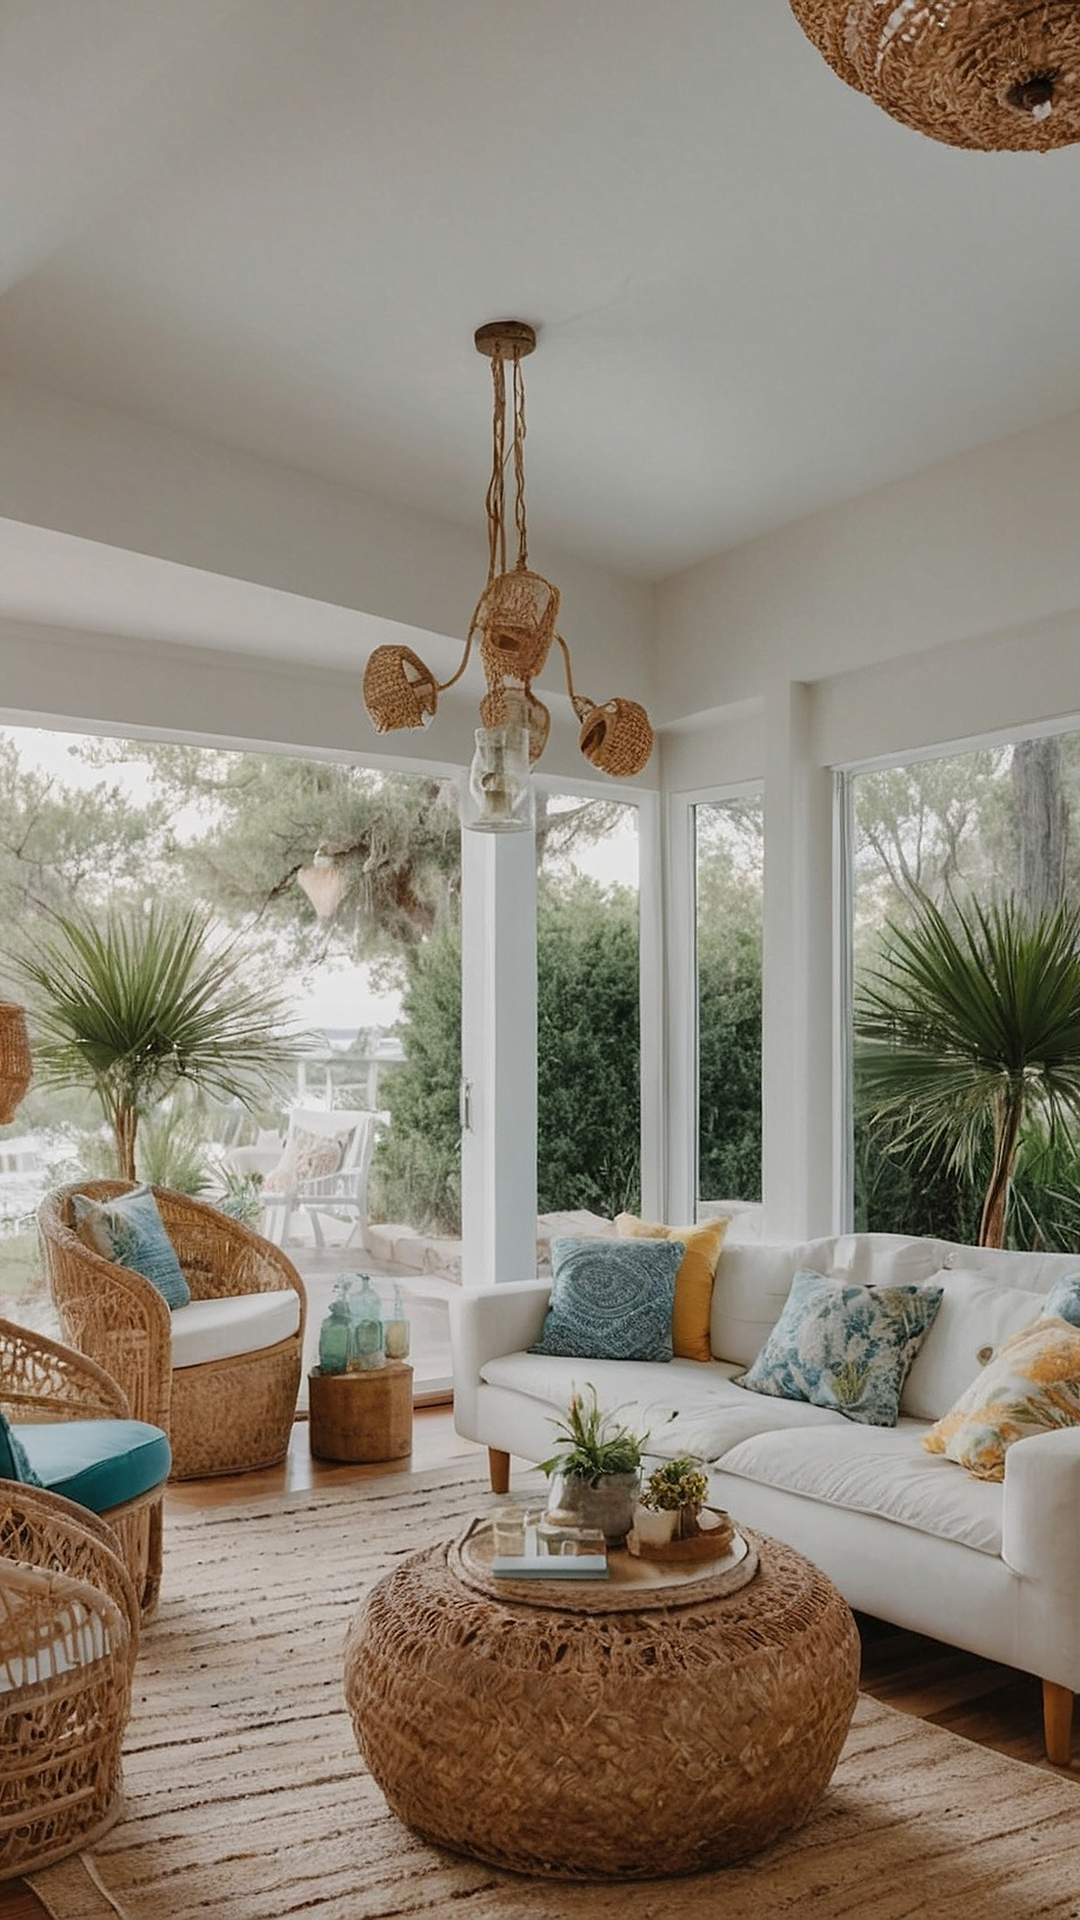 Tropical Oasis at Home: Summer Decor Inspiration